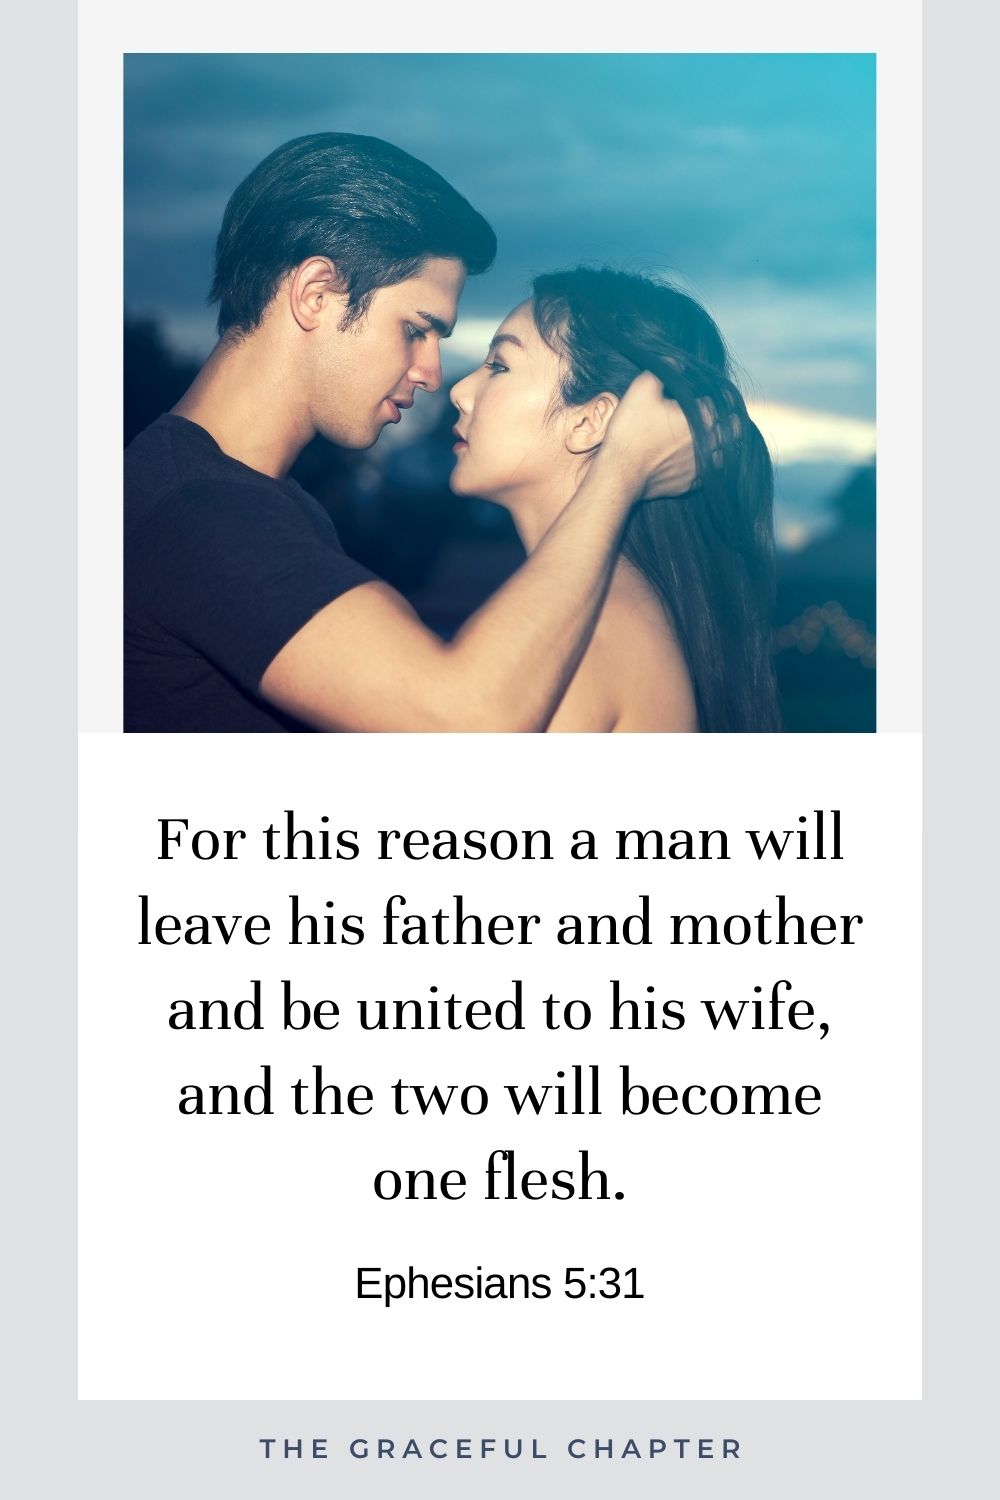 For this reason a man will leave his father and mother and be united to his wife, and the two will become one flesh. Ephesians 5:31